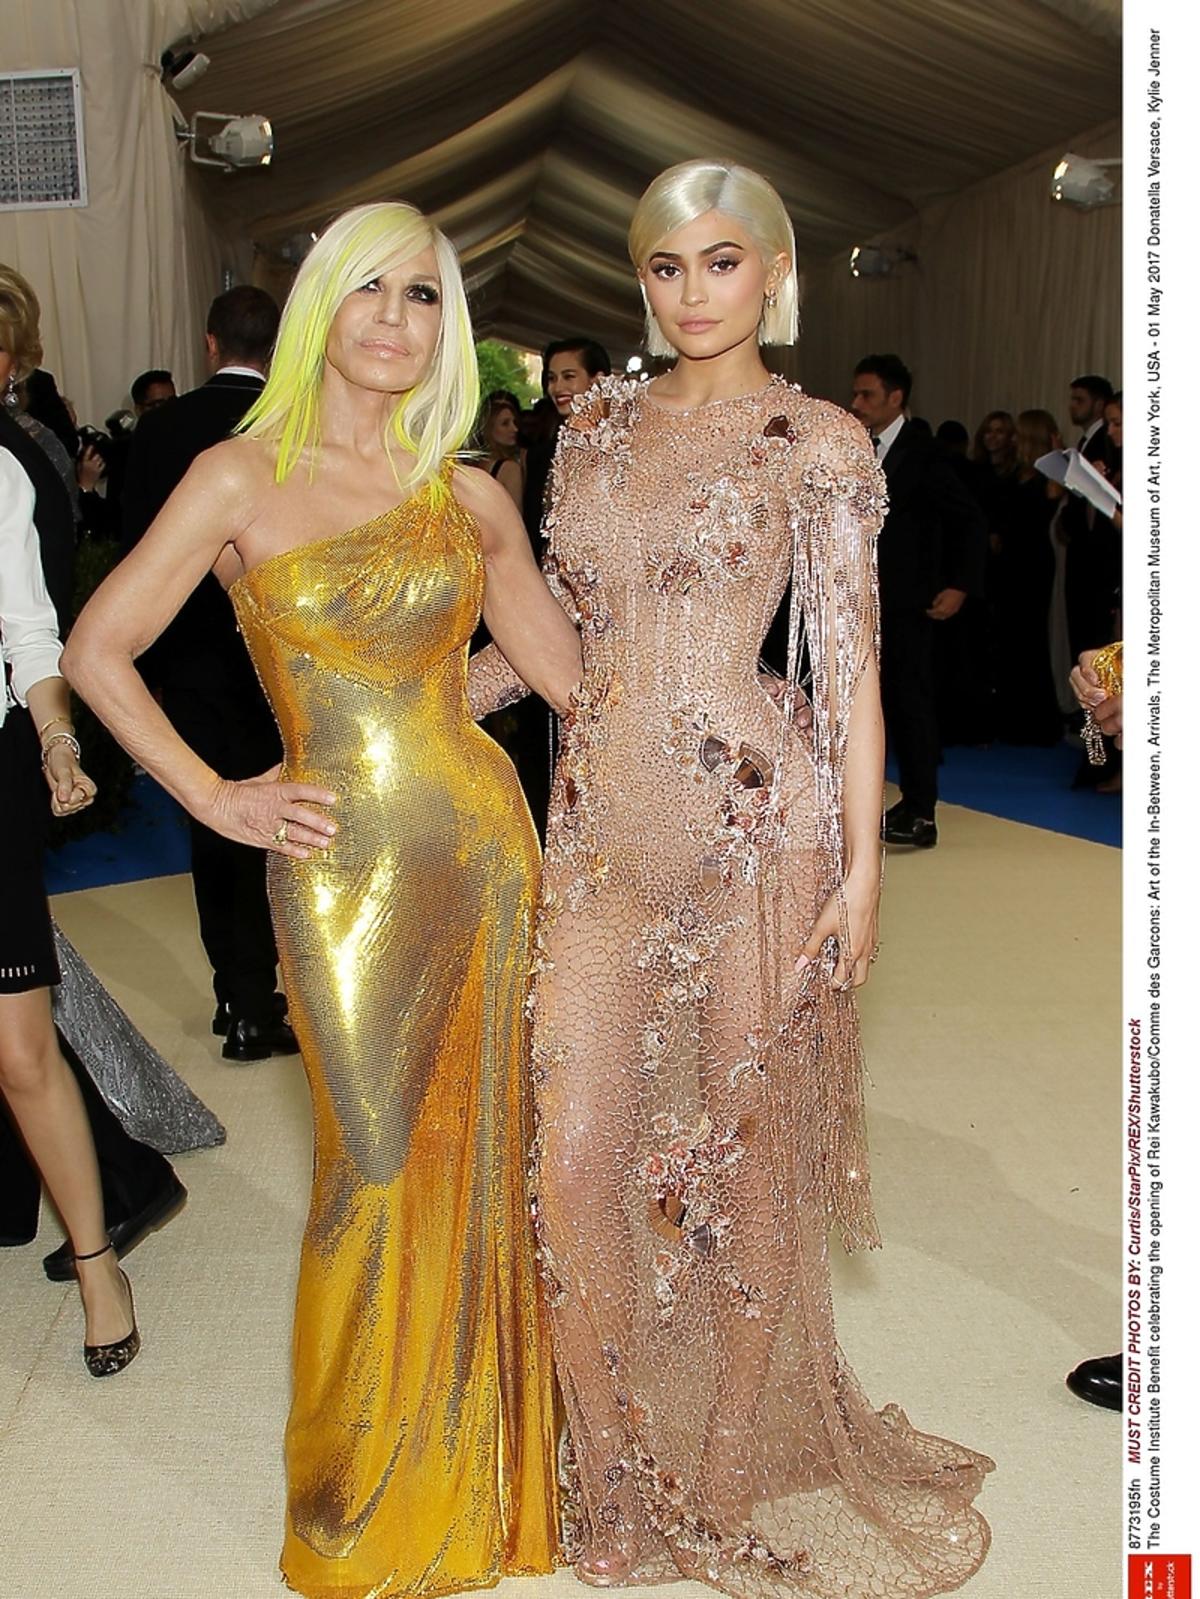 Donatella Versace and Kylie Jenner, wearing a Versace gown na MET Gala